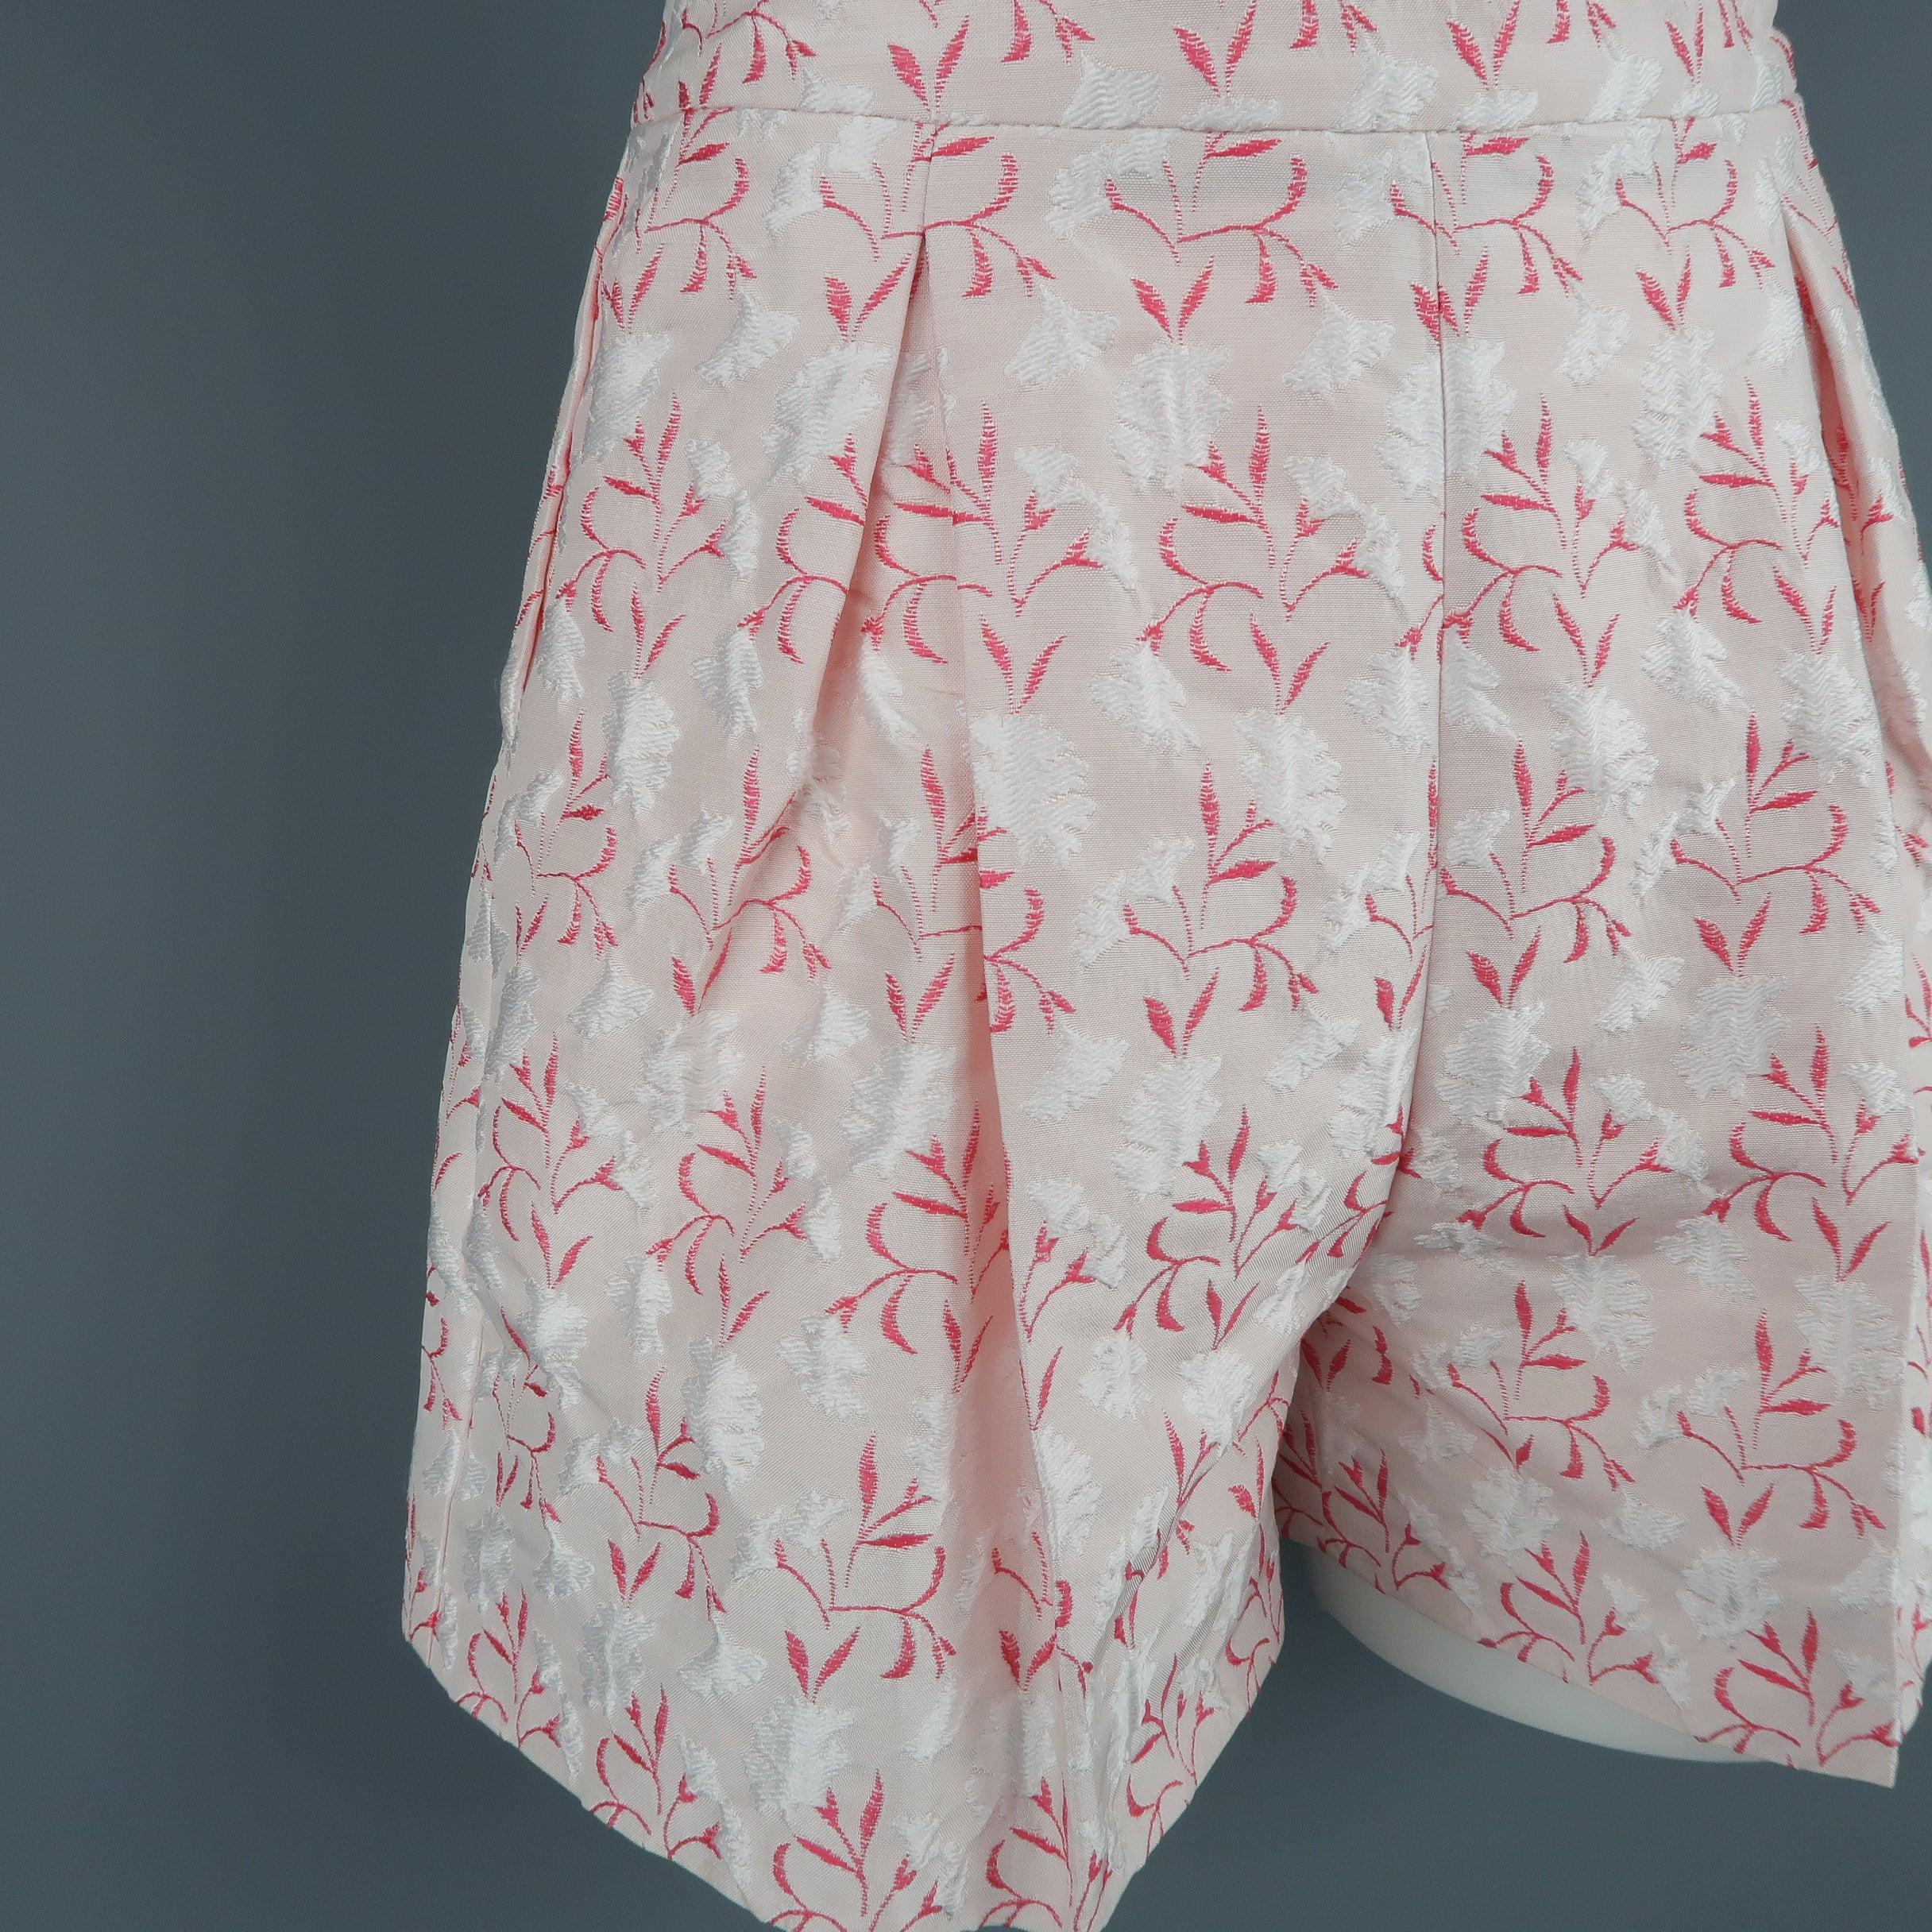 GIAMBATTISTA VALLI shorts come in a light pink silk blend floral damask fabric with a high rise, side pockets, and pleated front. Made in Italy.
Excellent Pre-Owned Condition.
 

Marked:   40/XS
 

Measurements: 
  
l	Waist: 25 inches 
l	Hip: 38